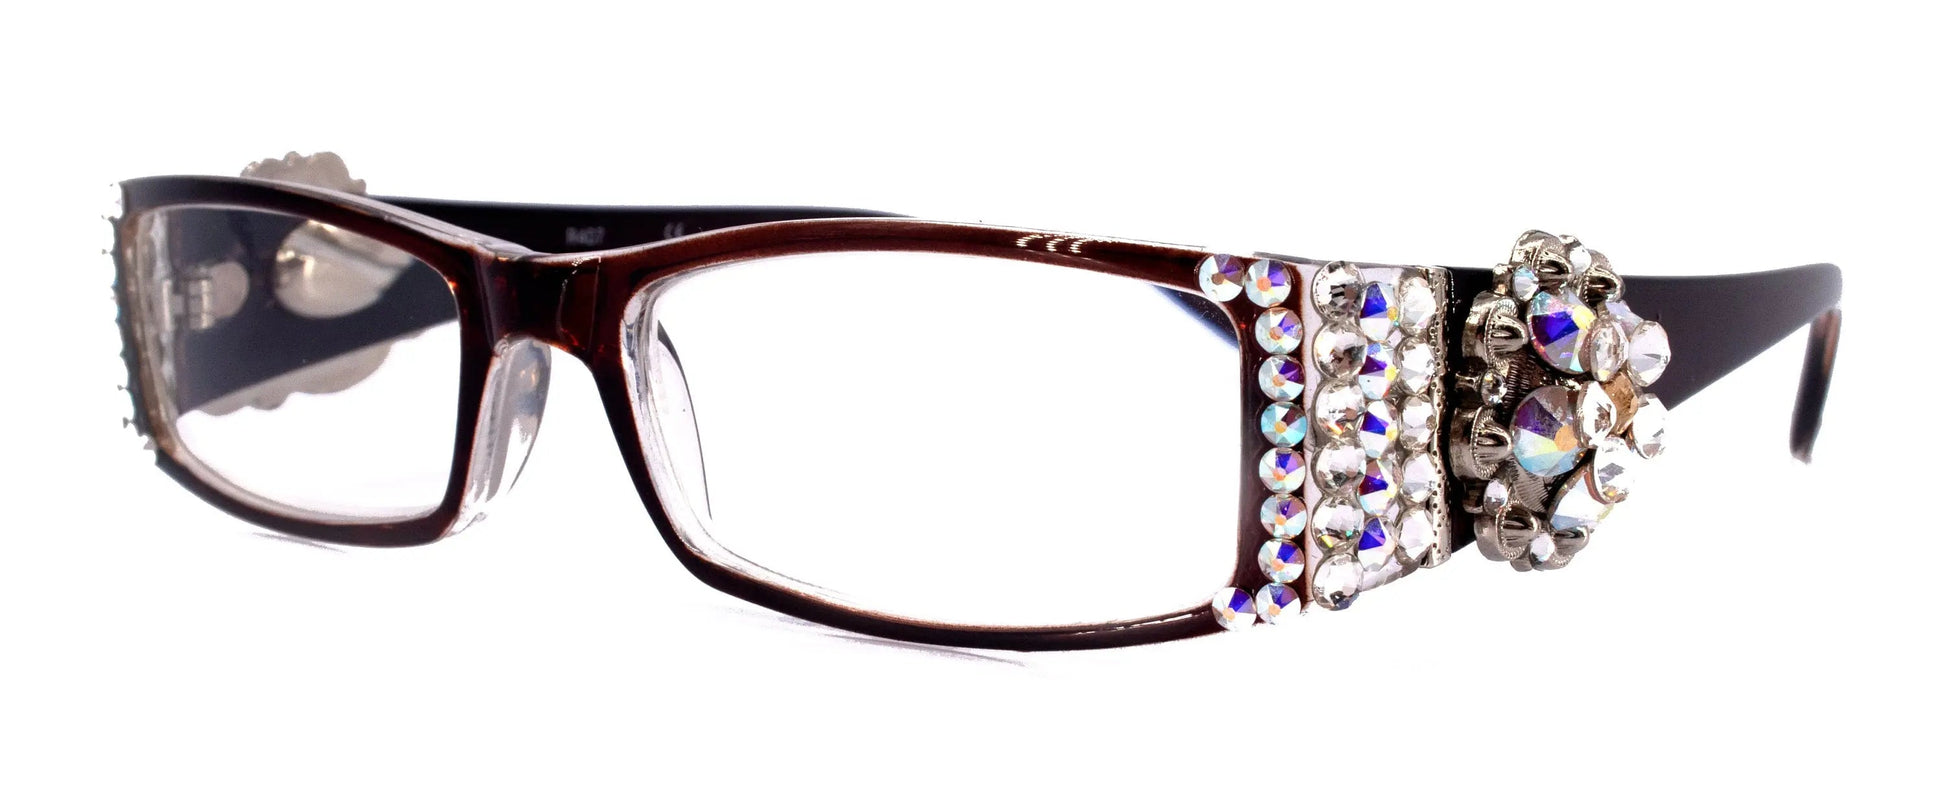 The Medallion, (Bling) Reading Glasses for Women W (Clear, AB Aurora Borealis) Genuine European Crystals Western Concho NY Fifth Avenue 